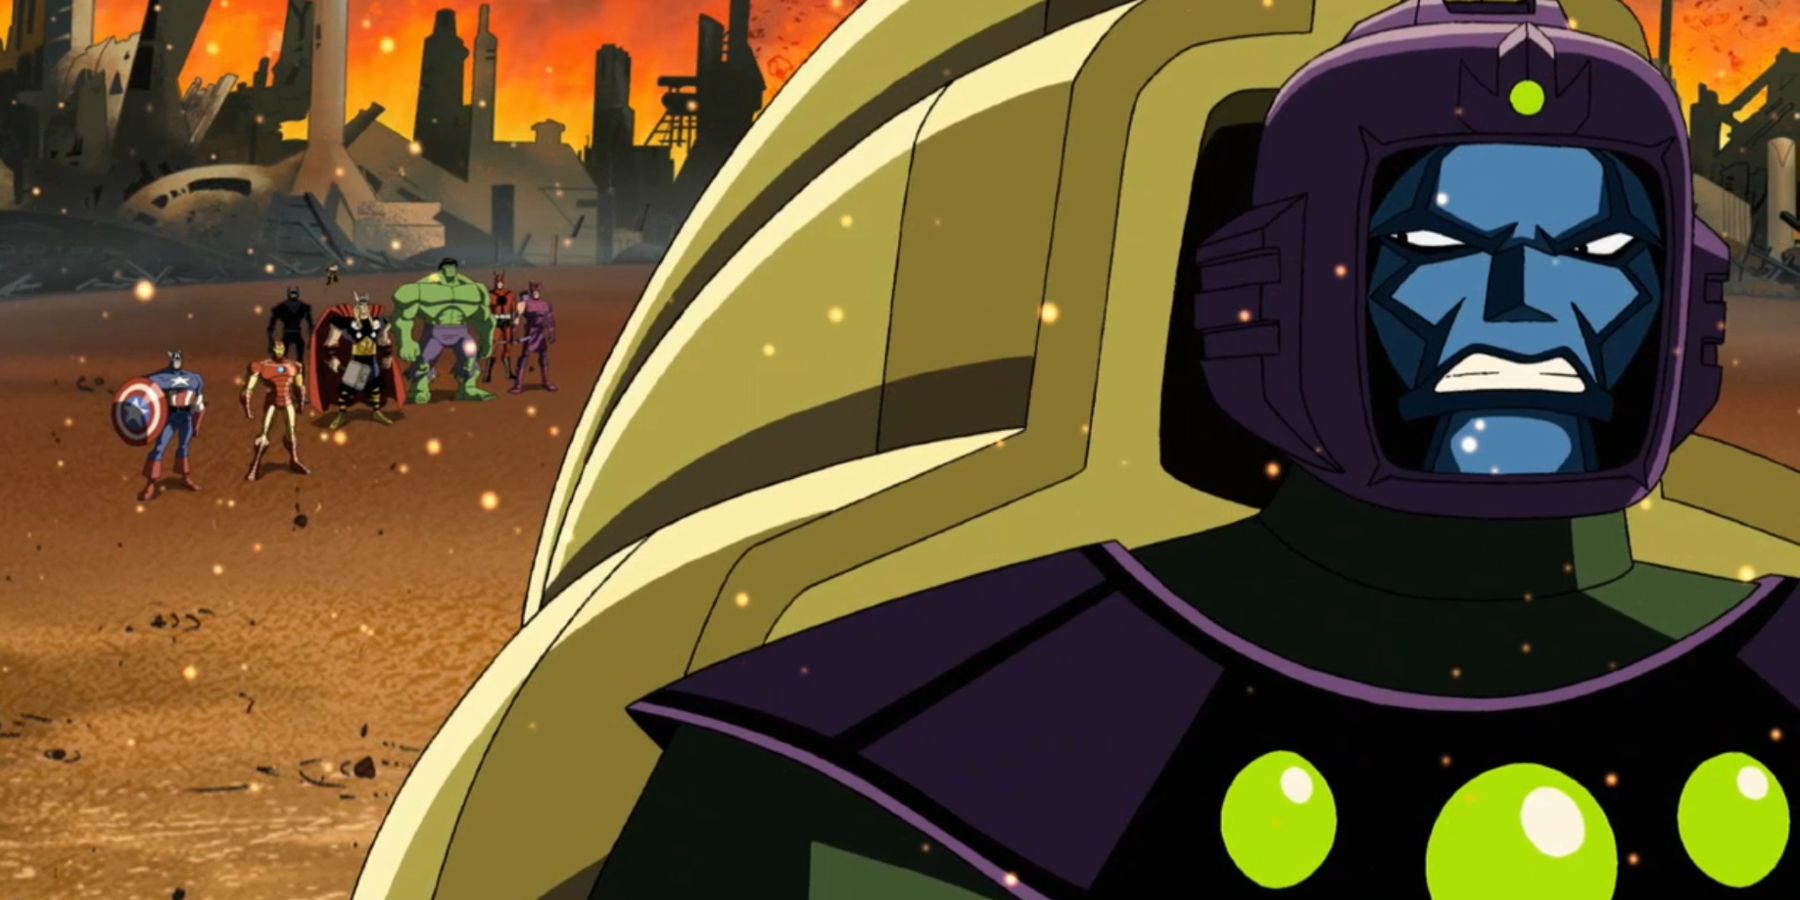 Kang The Conquerer showing the Avengers a vision of the future in Avengers: Earth's Mightiest Heroes